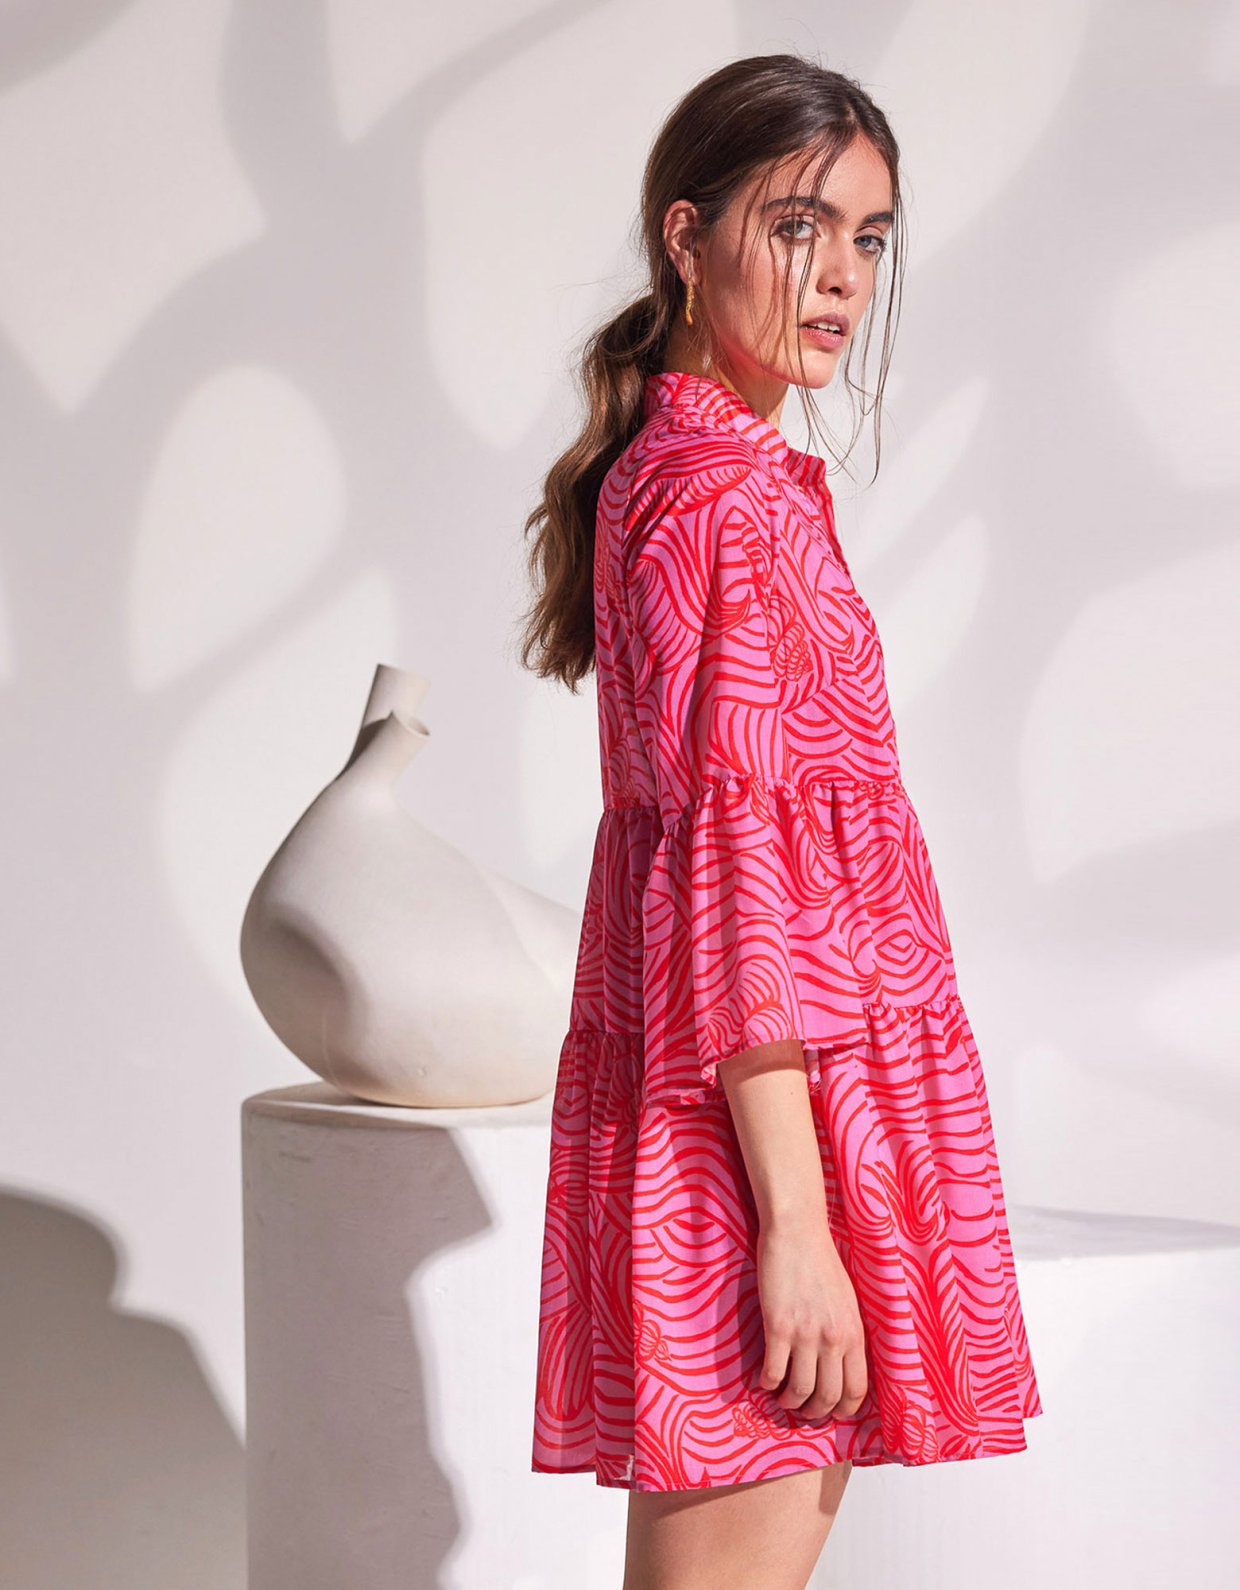 The Knl's Giornata ruffle dress pink waves